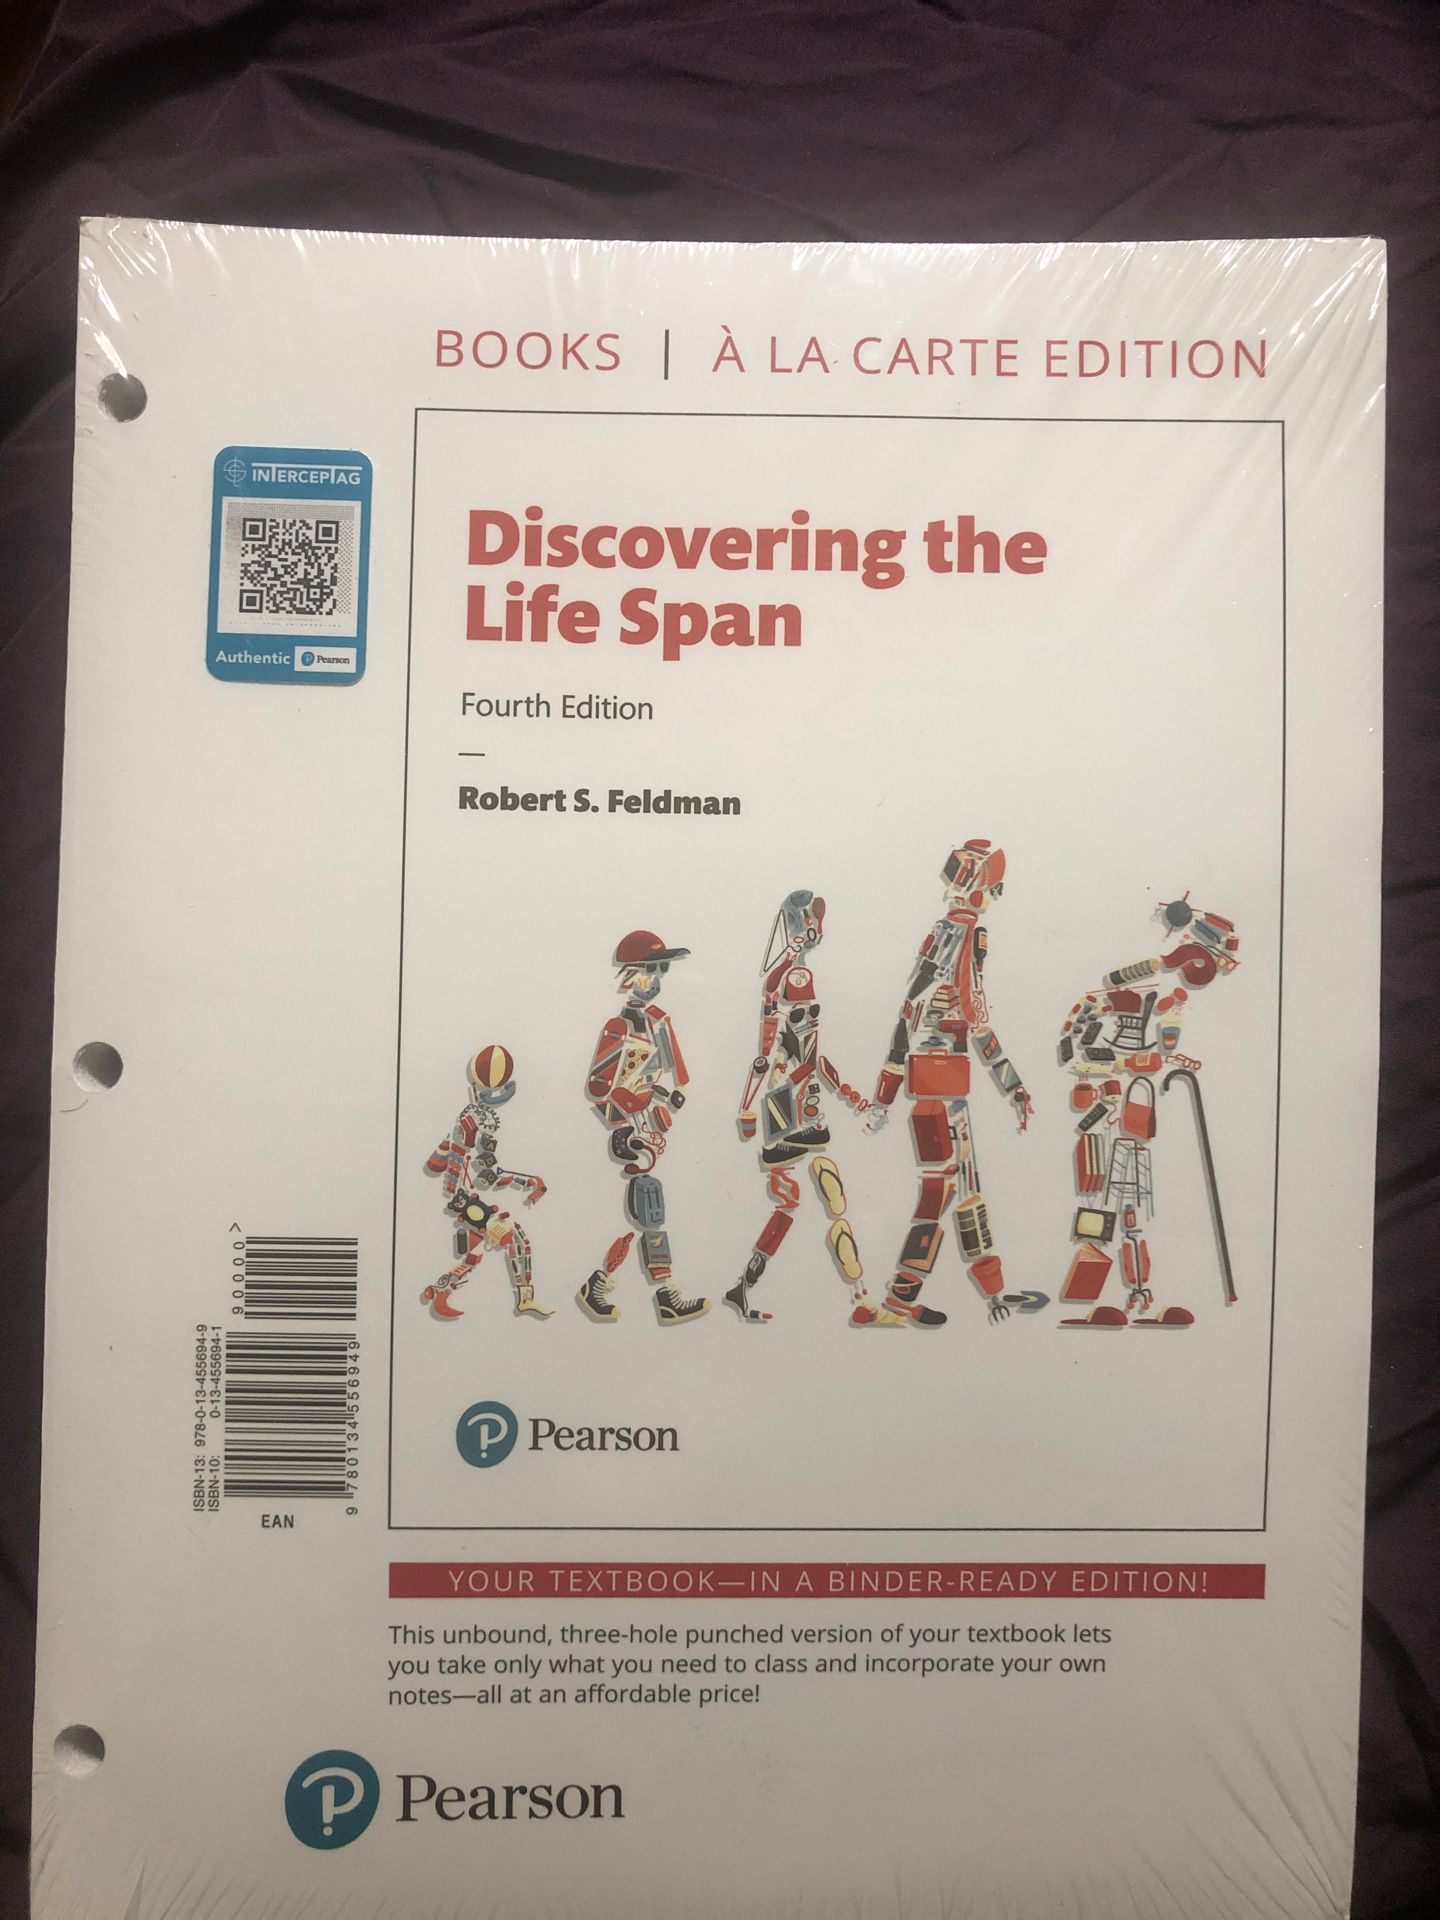 Discovering the Life Span (4th Edition)